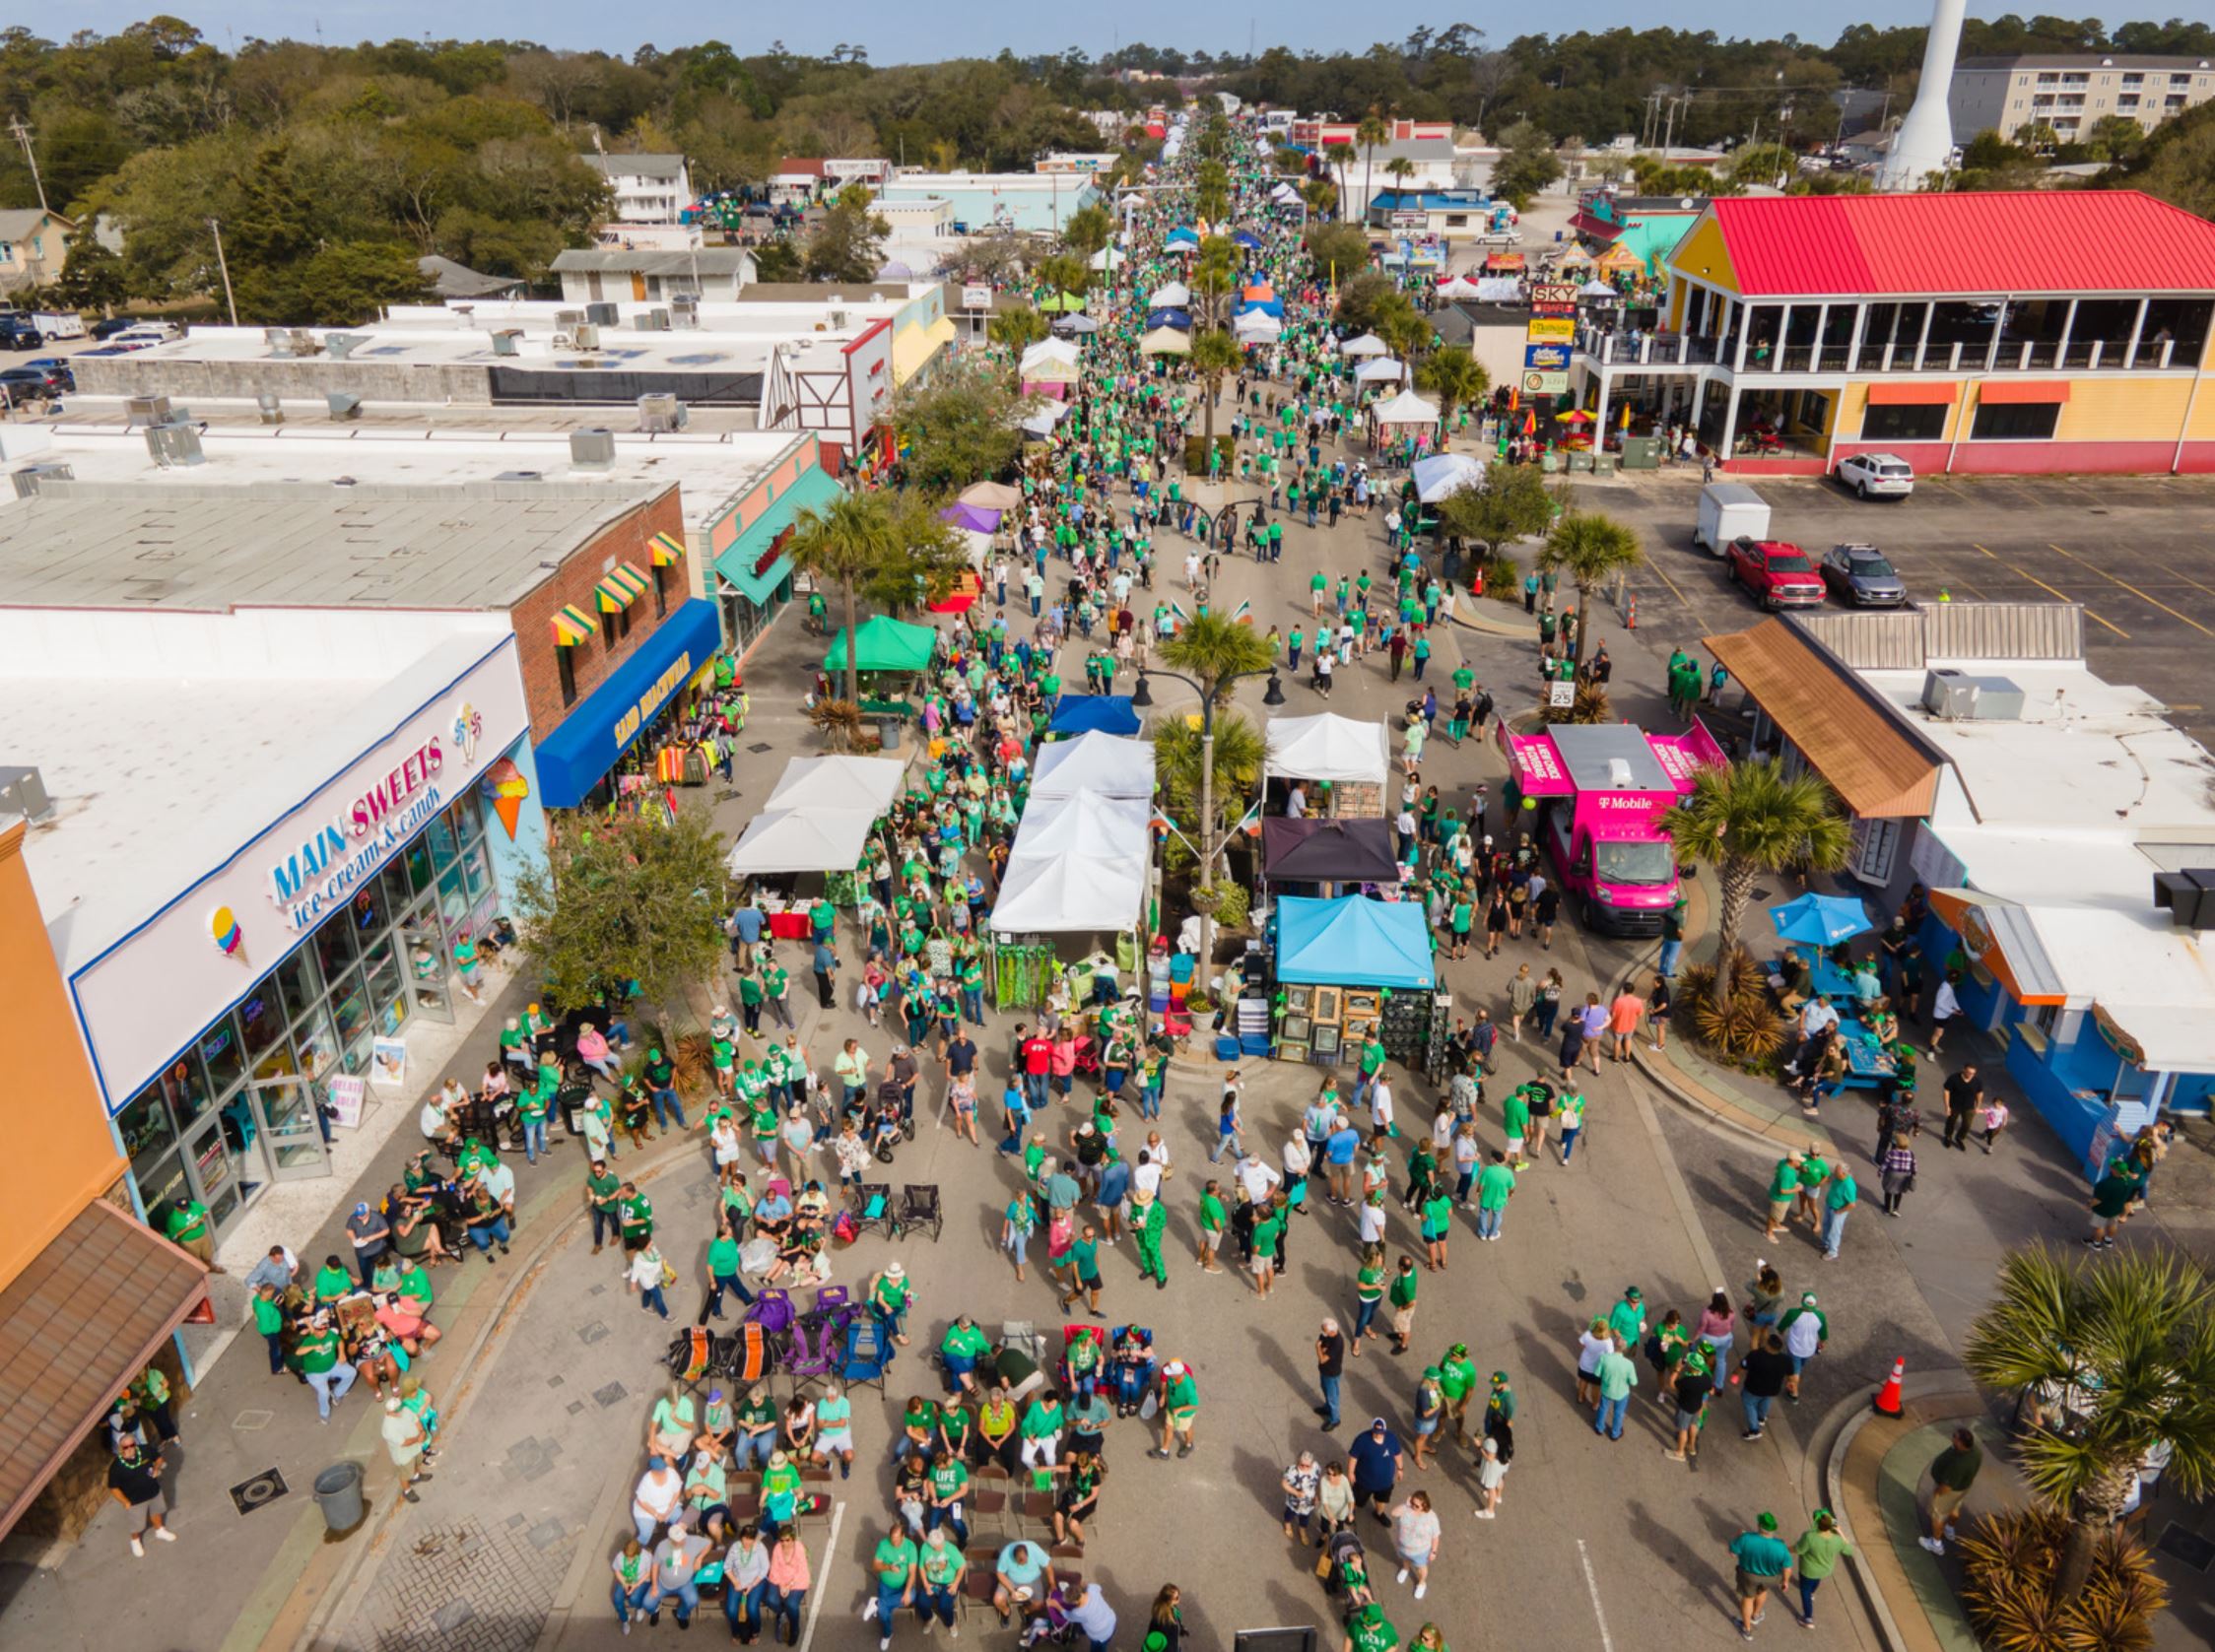 A view of River Street during St. Patricks Day, from our Patio